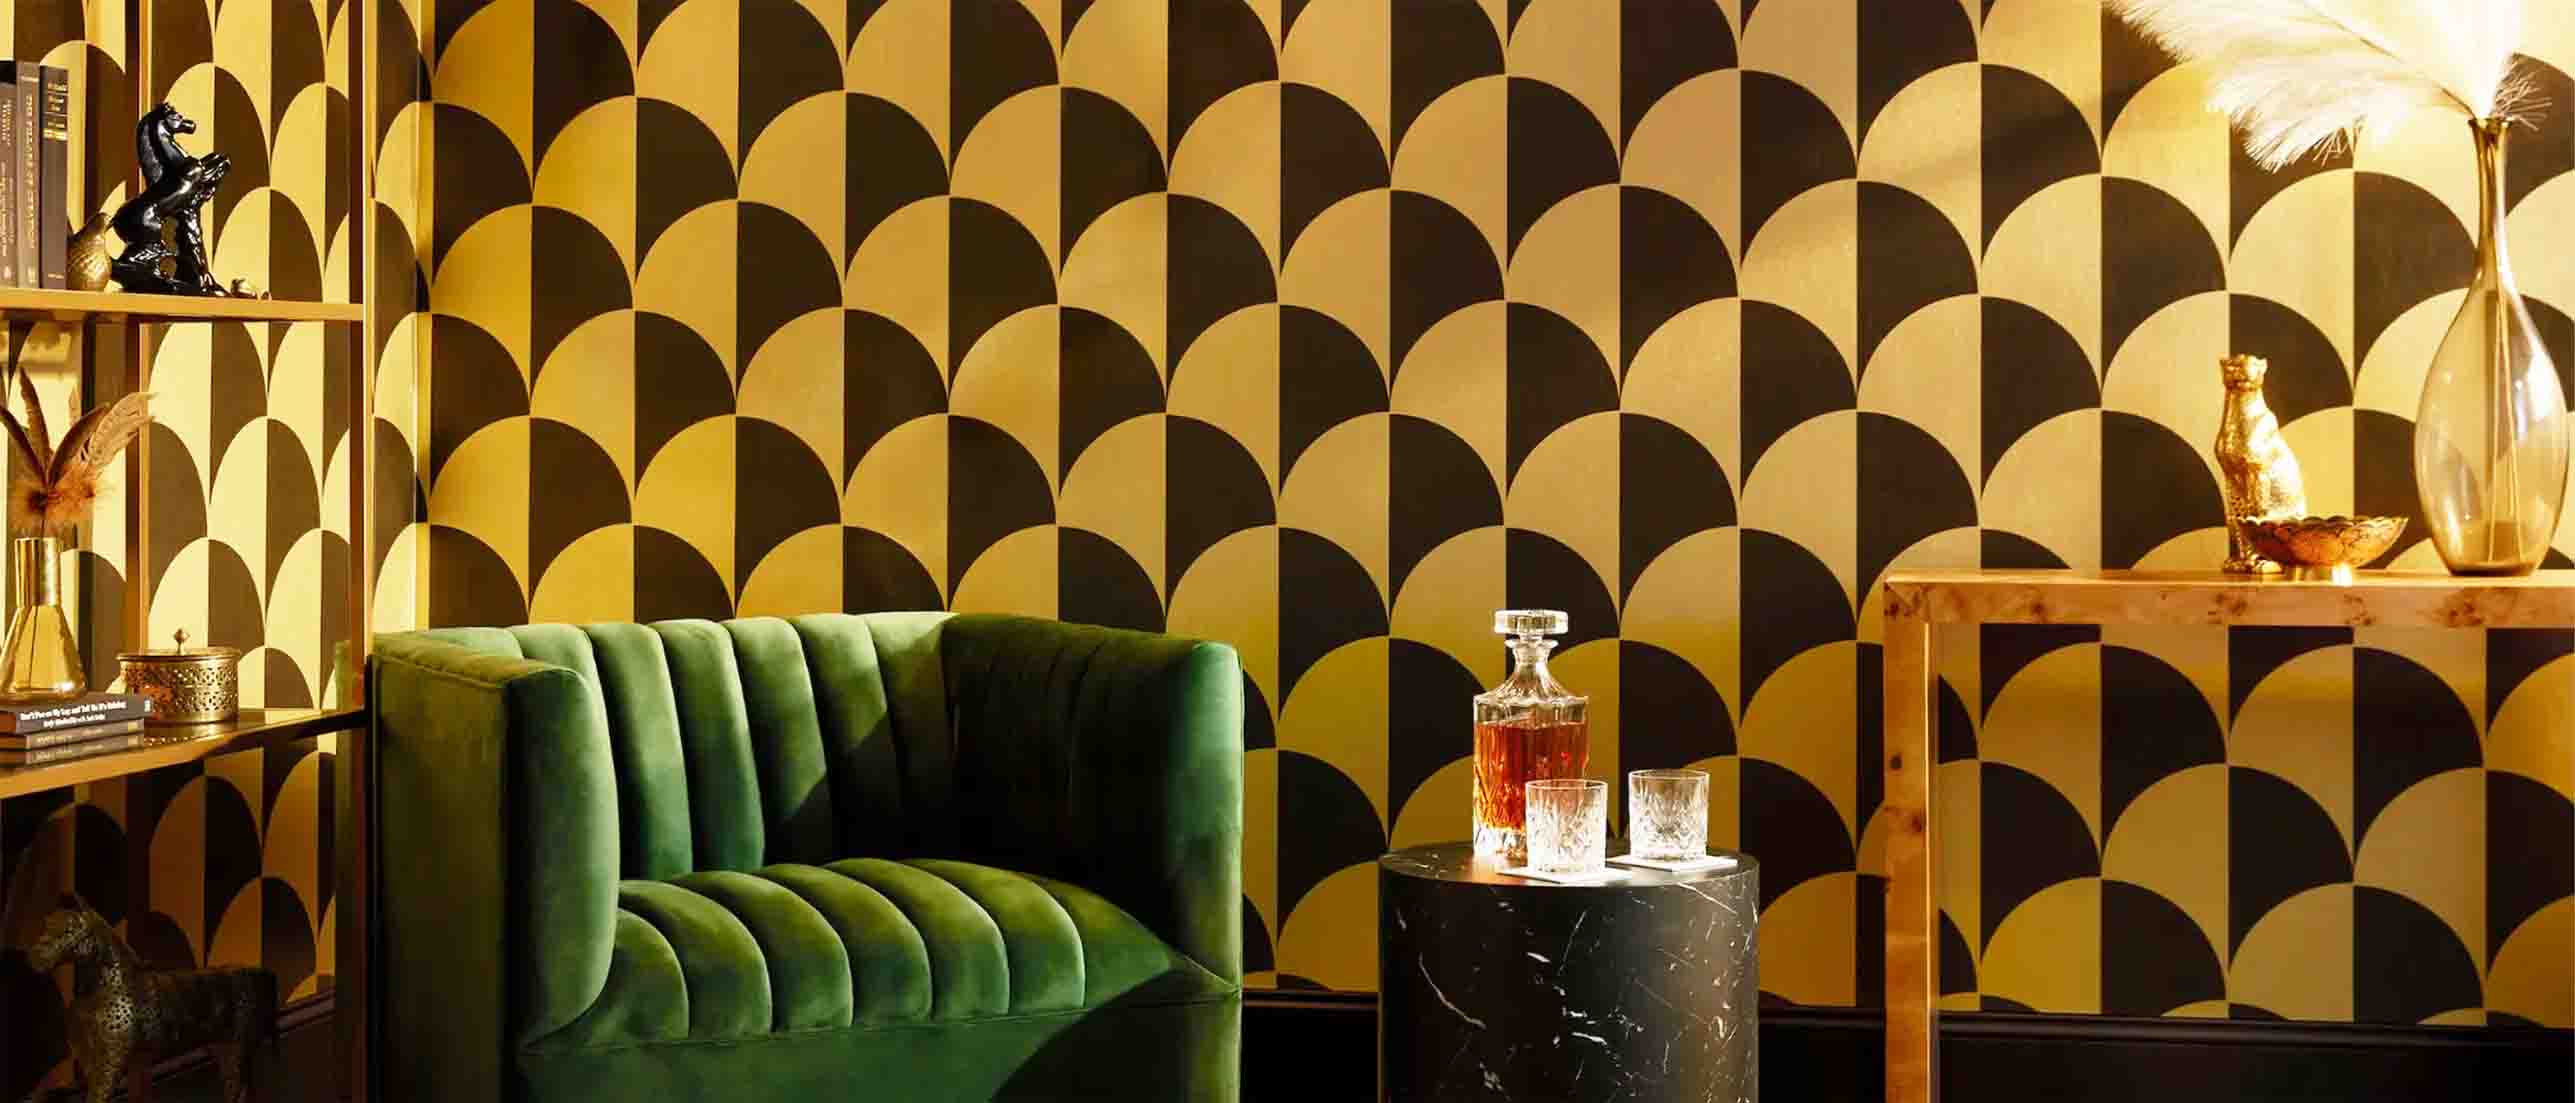 gold metallic round checkers wallpaper, green velvet armchair, bookcase, table and a bottle of drink